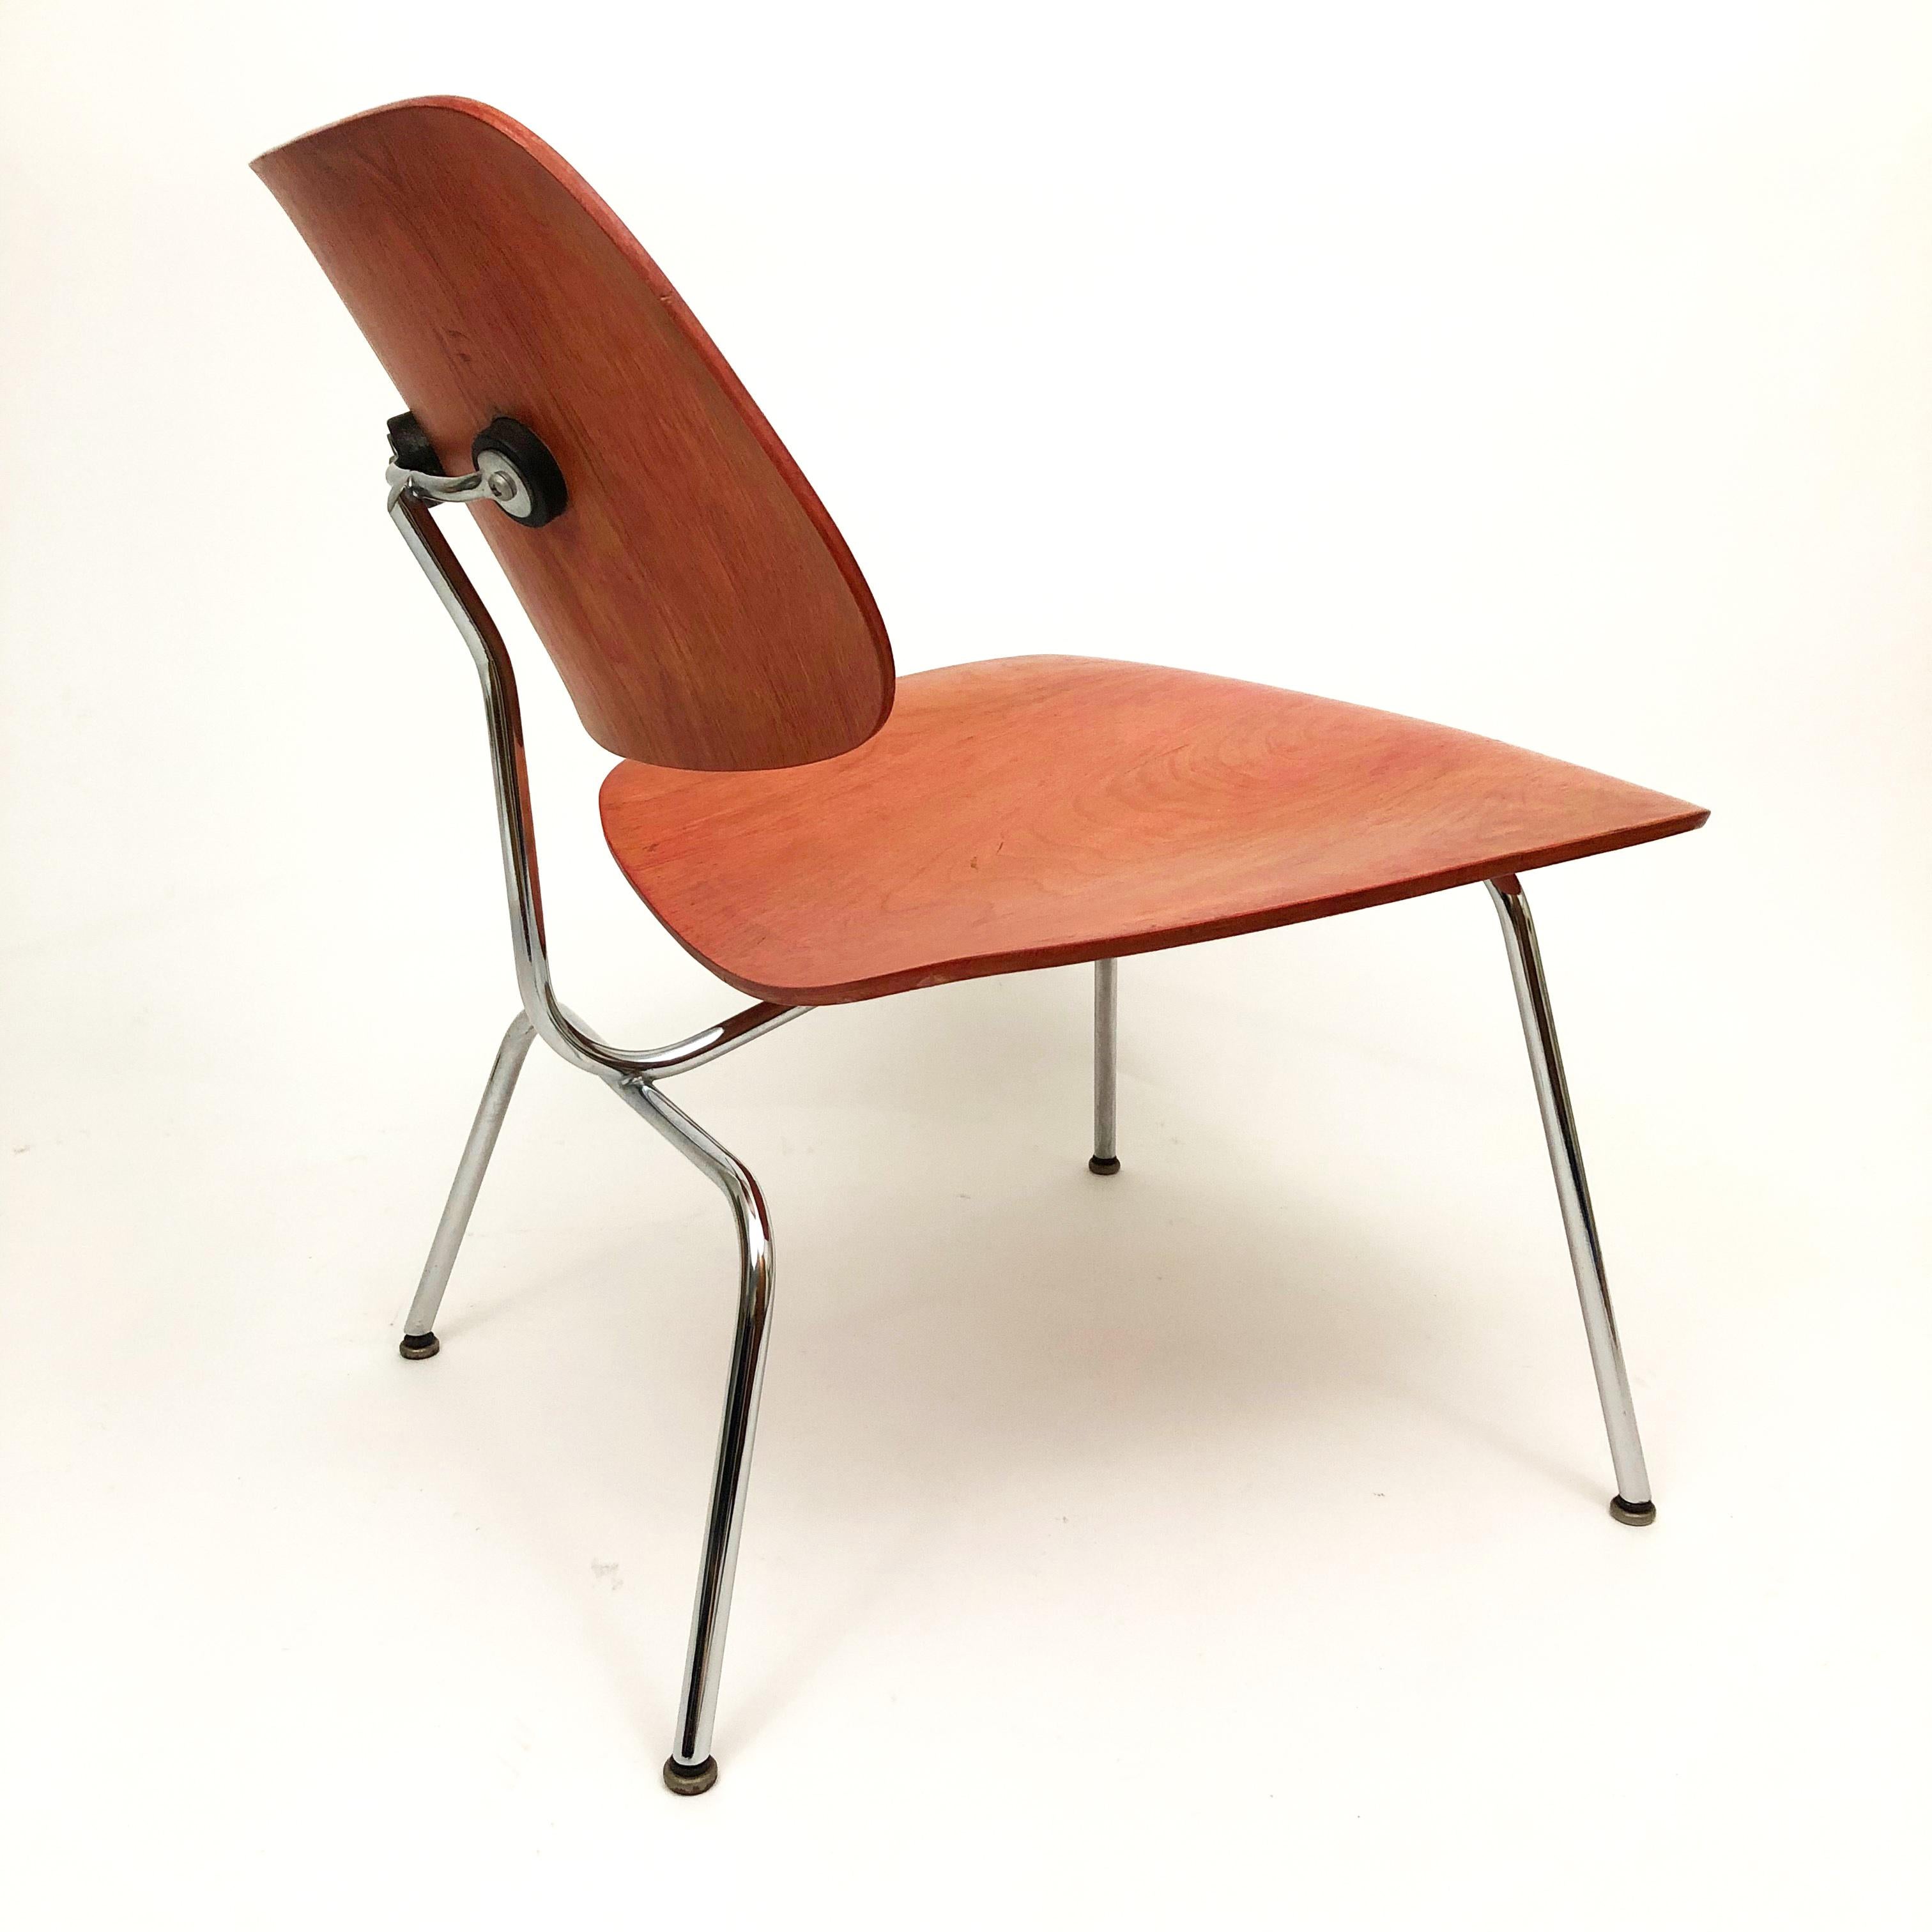 Molded LCM Lounge Chair by Charles and Ray Eames for Herman Miller